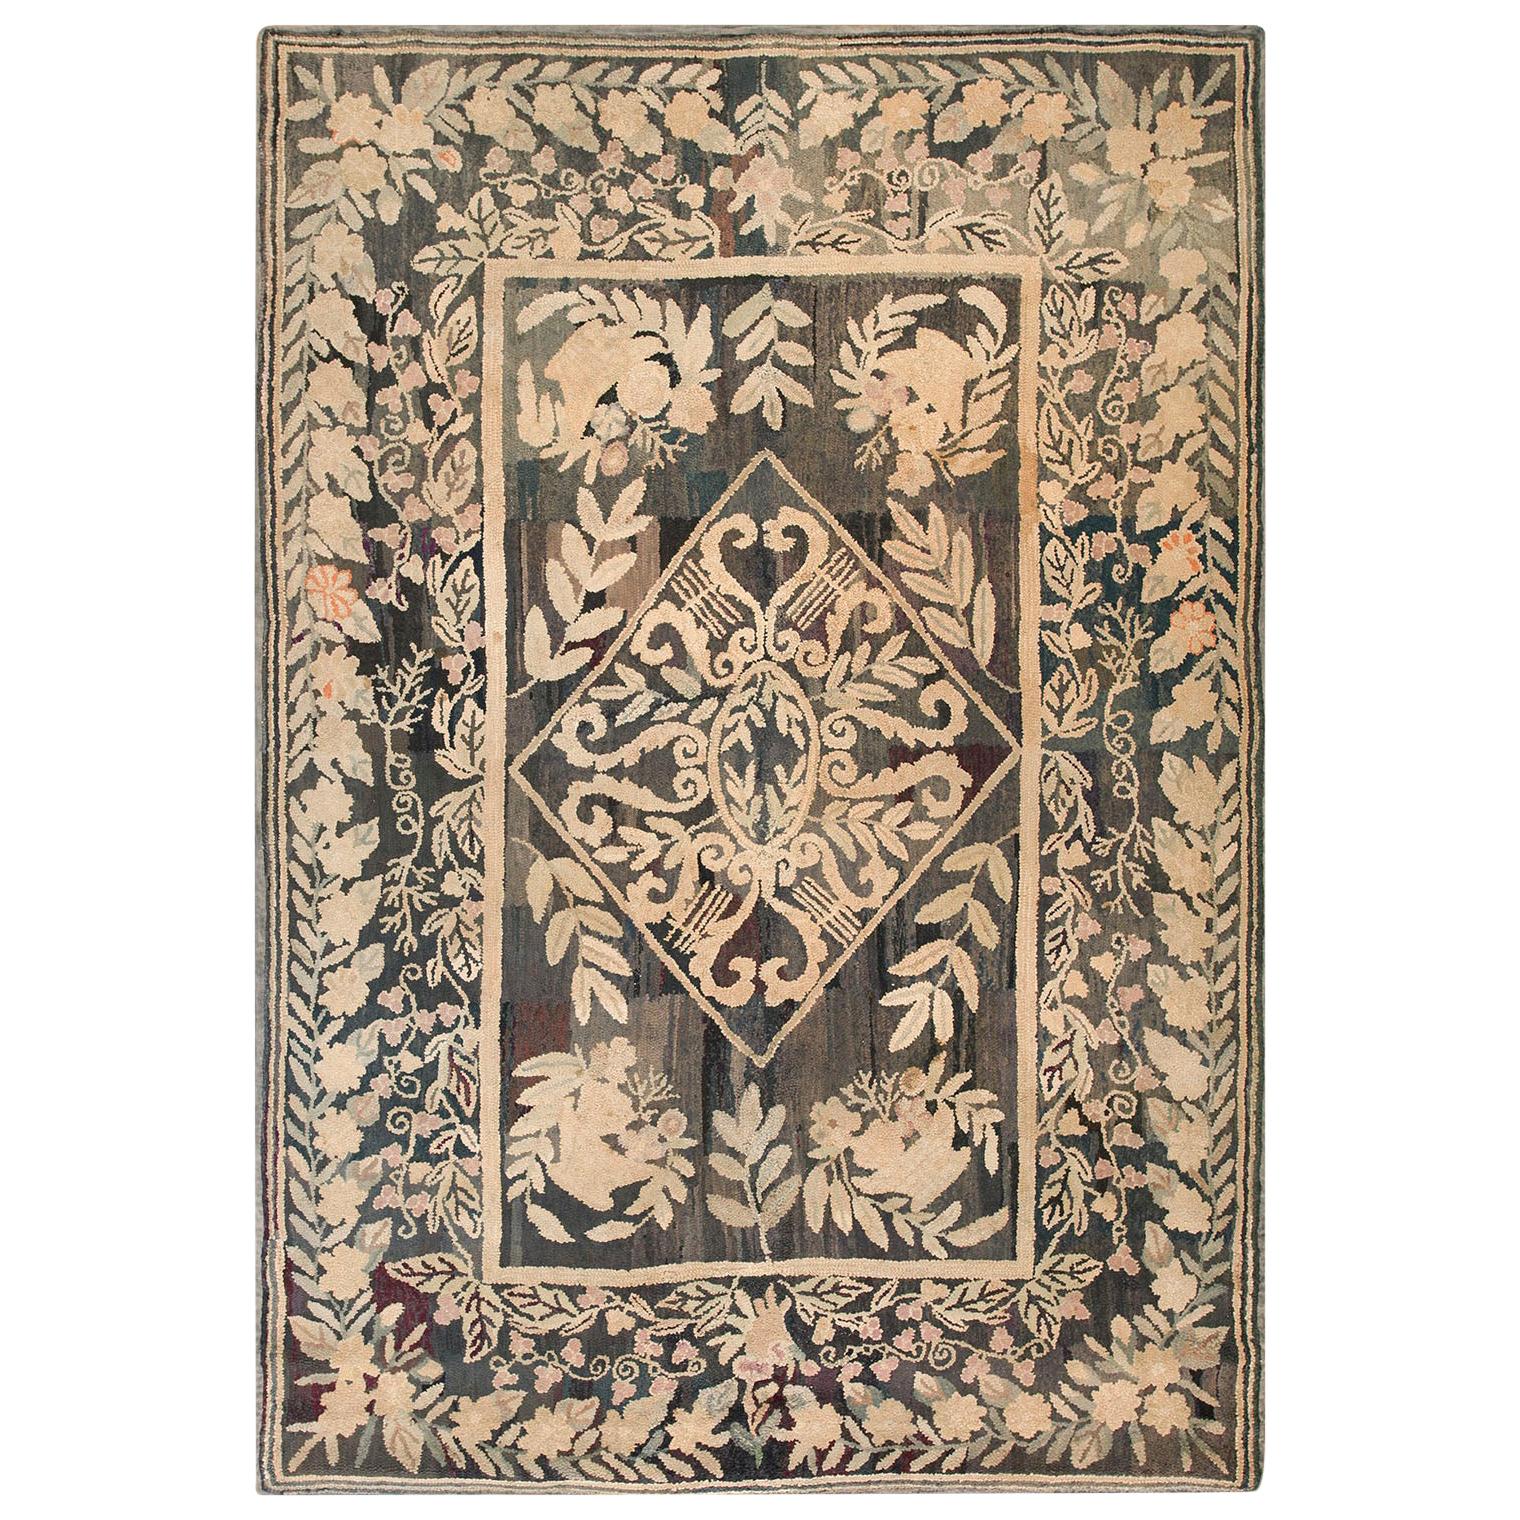 Antique American Hooked Rug 6' 0" x 9' 0"